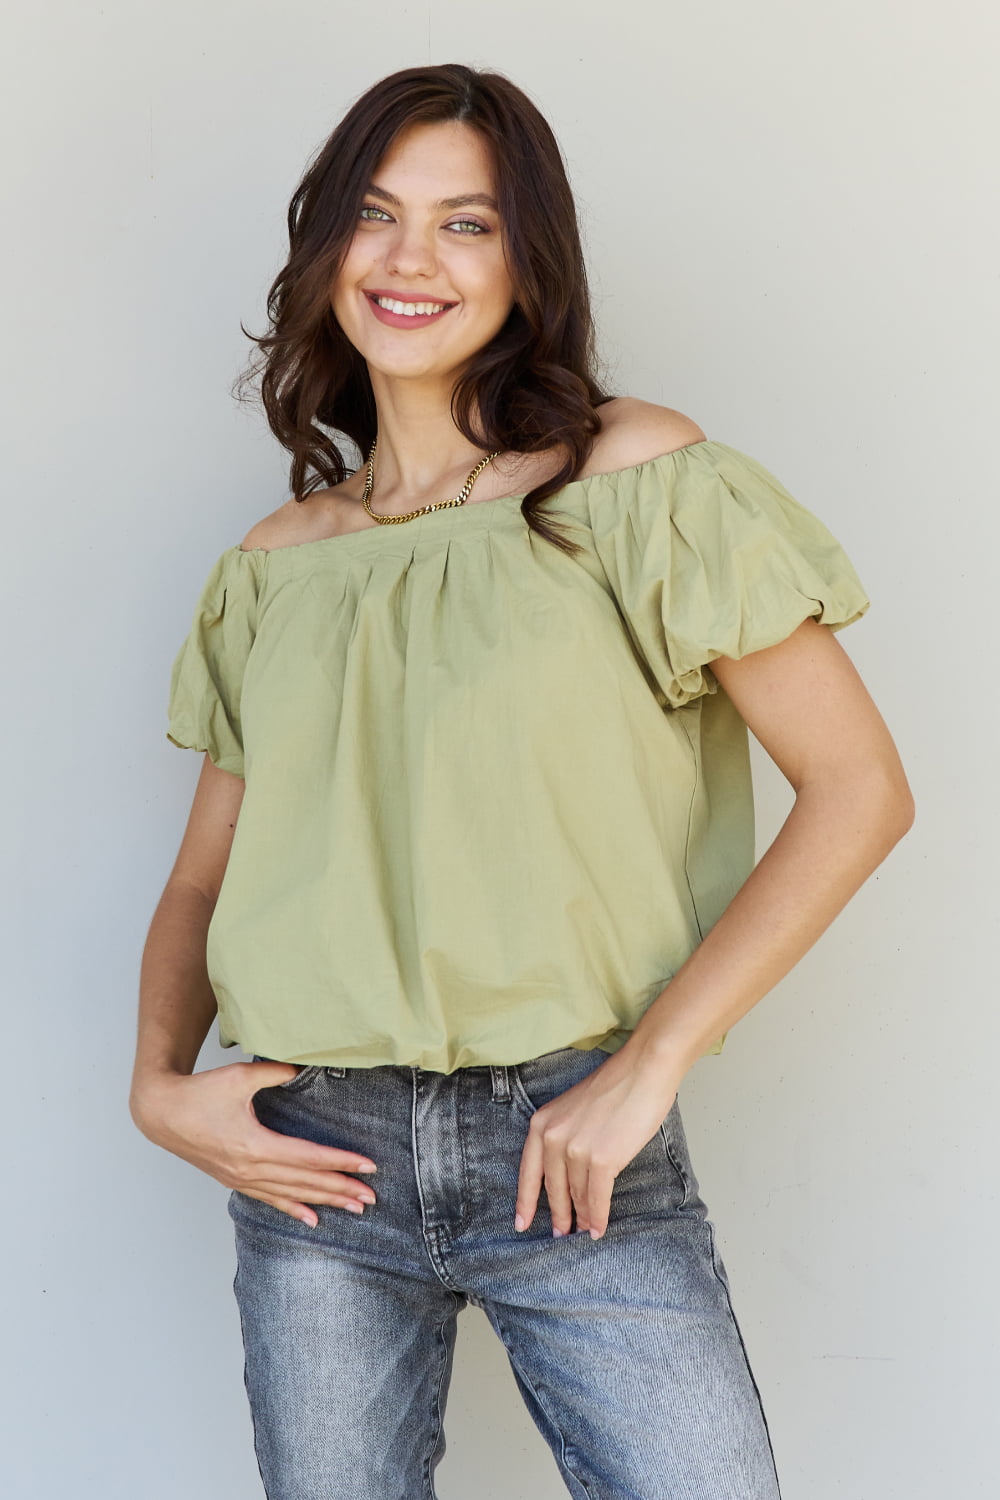 HEYSON Light The Way Off The Shoulder Puff Sleeve Blouse in Lime